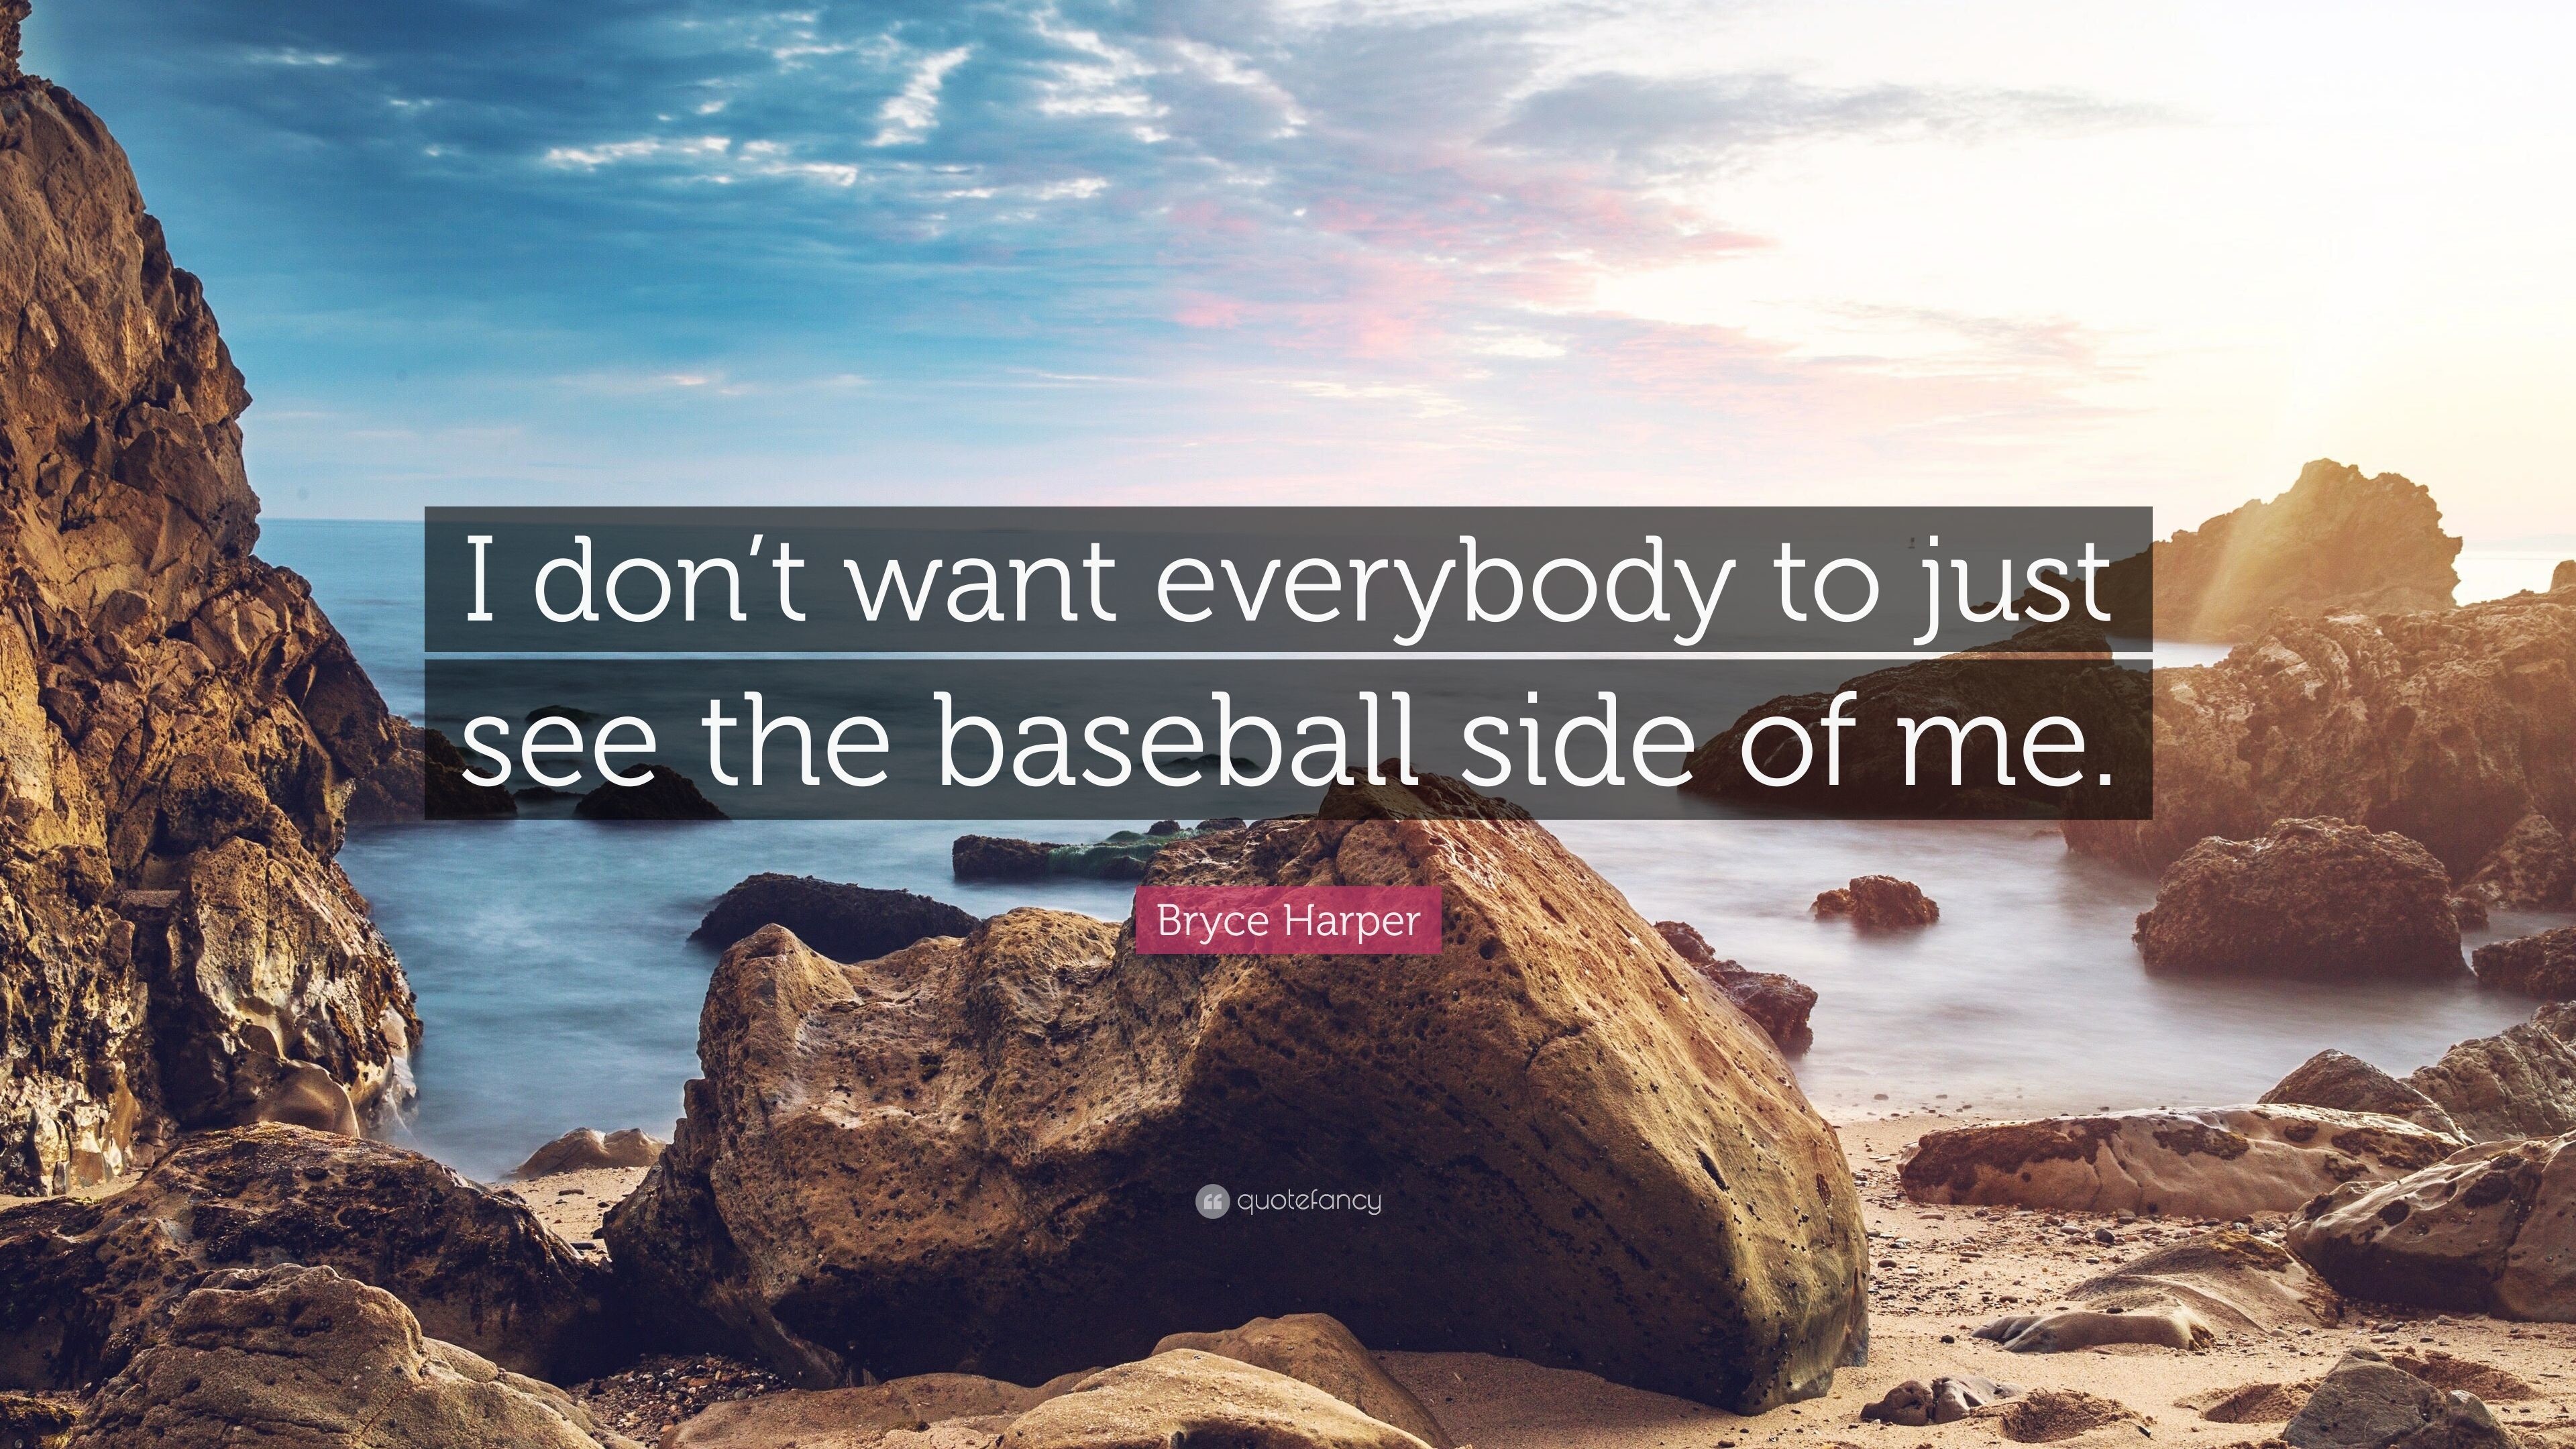 3840x2160 Bryce Harper Quote: “I don't want everybody to just see the baseball